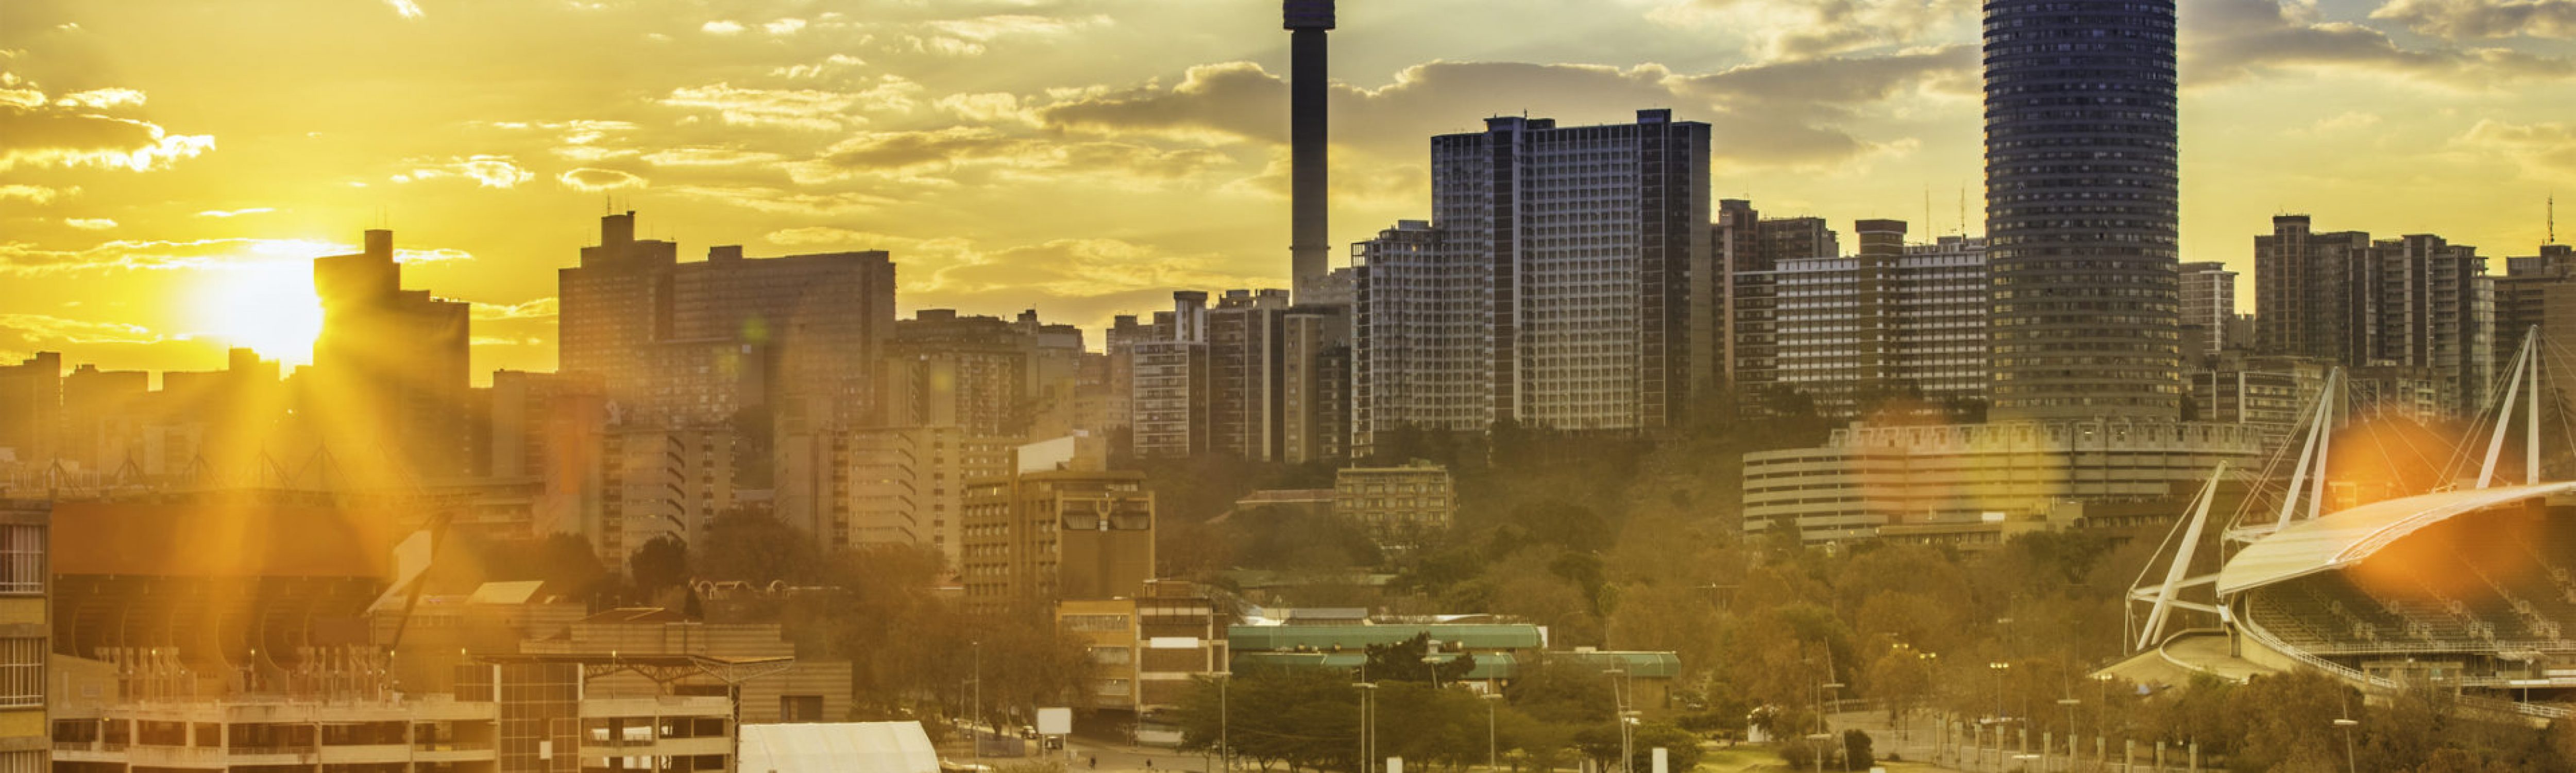 Johannesburg cityscape, taken at sunset, showing Hillbrow residential centre with the prominent Ponte flats and the communications tower. Image for the African and Middle Eastern Capacity Building Workshop series.